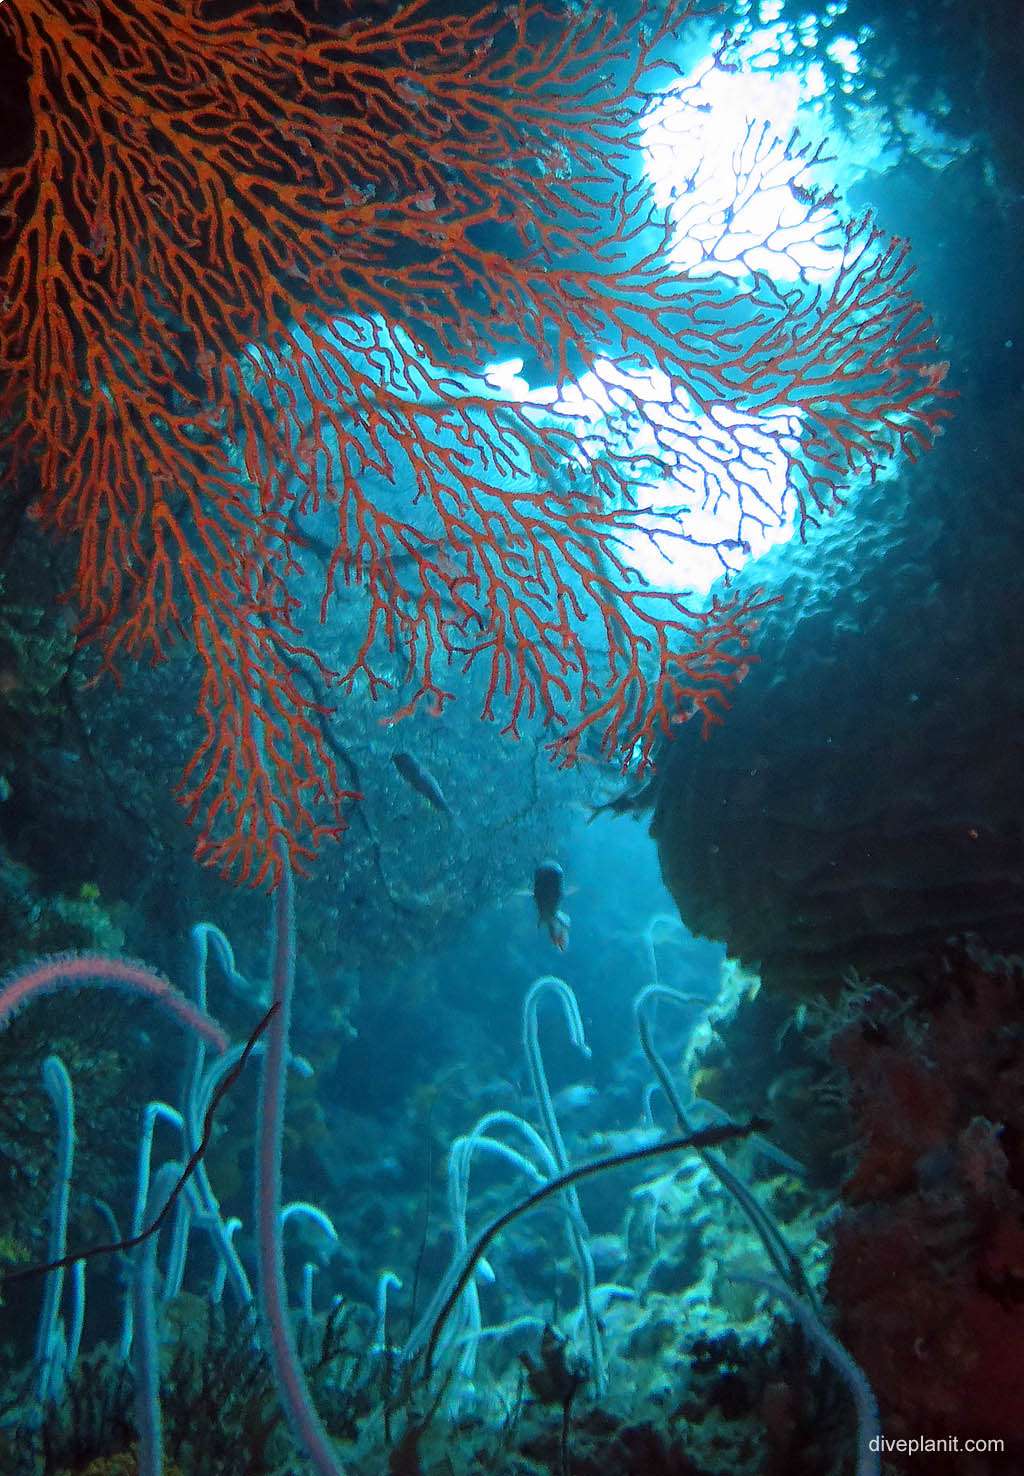 Lots of hollows - Whip coral and seafans in silhouette at Chanapoana Point diving Uepi in the Solomon Islands by Diveplanit